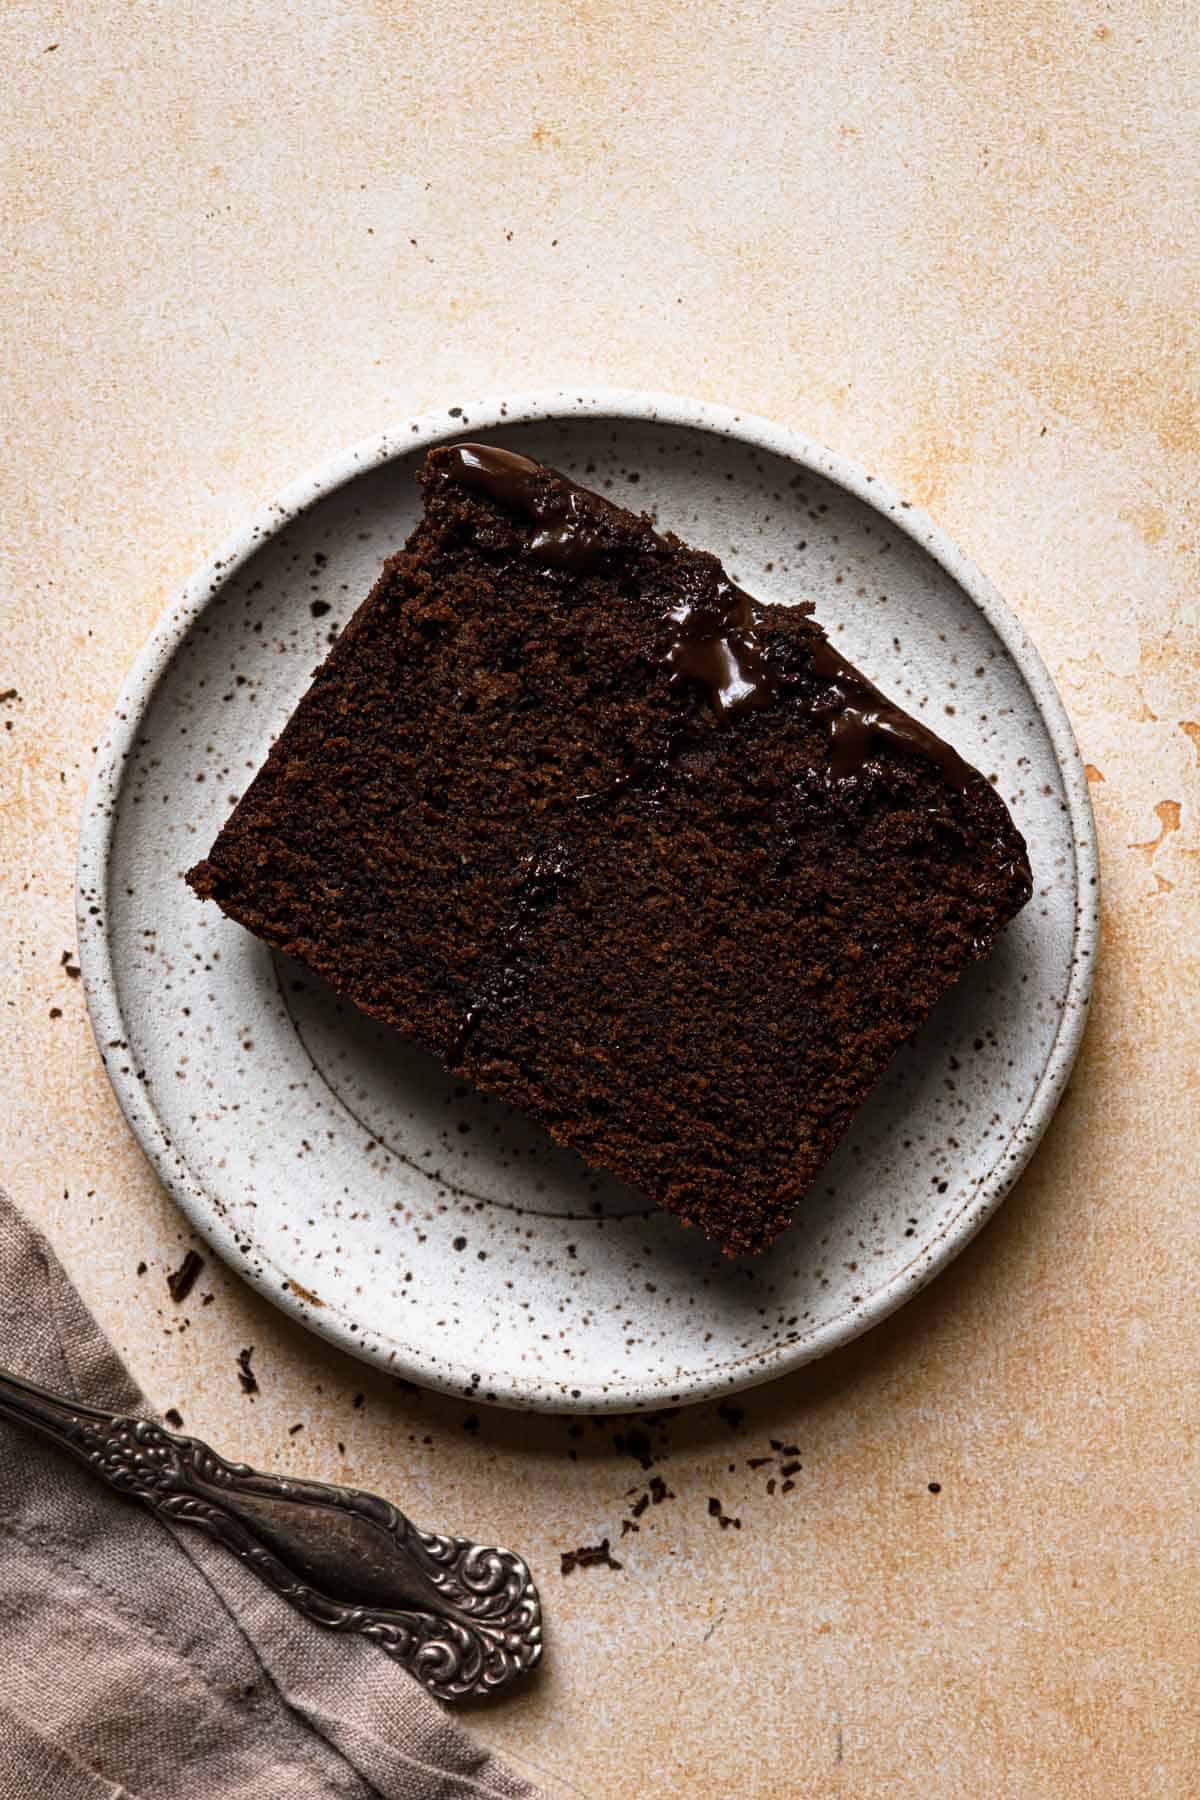 This is a soft, tender and moist Chocolate Gin Cake. Packed with chocolate and coffee flavors that are enhanced by the gin. this recipe is great for birthday and the holidays. |#chocolatecake #chocolatecakerecipe #chcolategincake #gincake #boozycakerecipe #moistchocolatecake#easychocolatecake  #chcolatecakefromscratch #gin #gindessertrecipe #dessertrecipe #holidaybaking #fallbaking #holidayrecipeidea #holidaycake #birthdaycake #layercake|